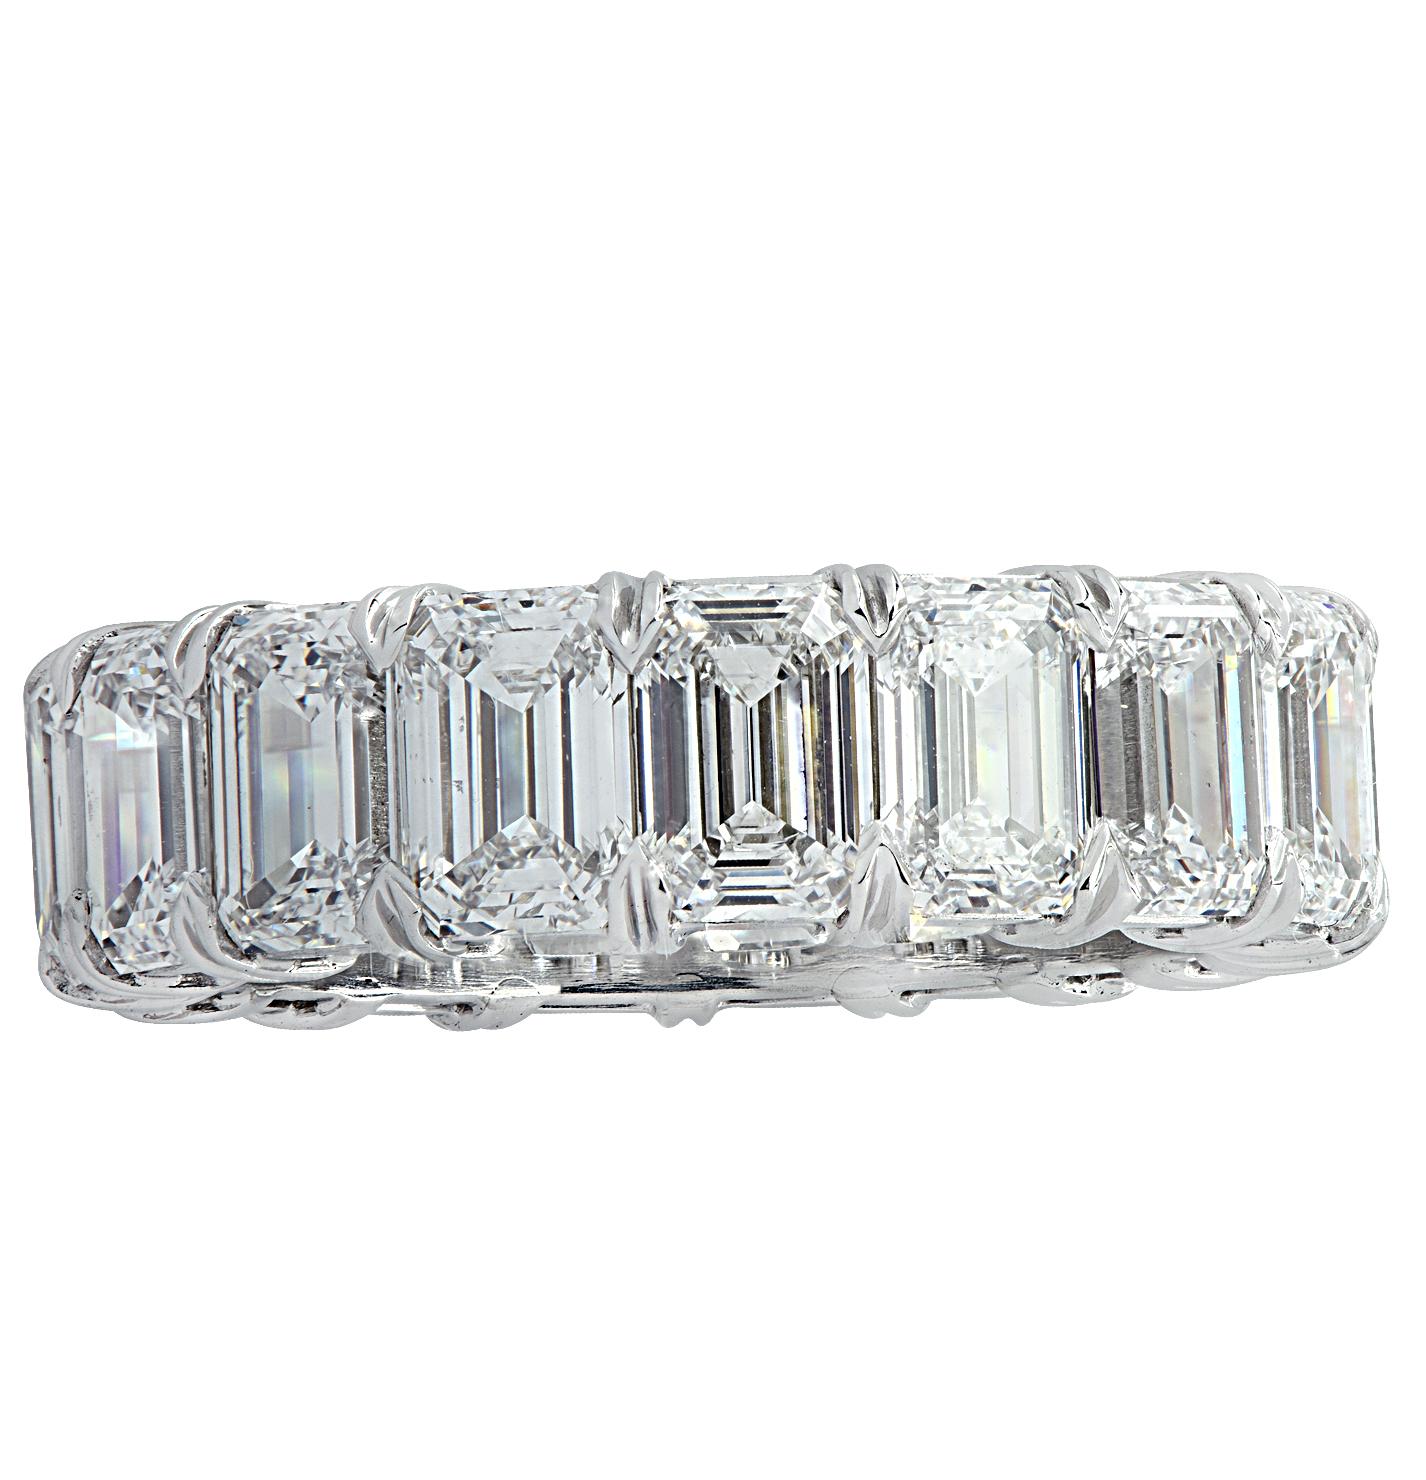 Vivid Diamonds eternity band crafted by hand in platinum, showcasing 17 spectacular GIA certified emerald cut diamonds weighing 7.73 carats total, D-E color, IF- VS2 clarity. Each diamond was carefully selected, perfectly matched and set in a